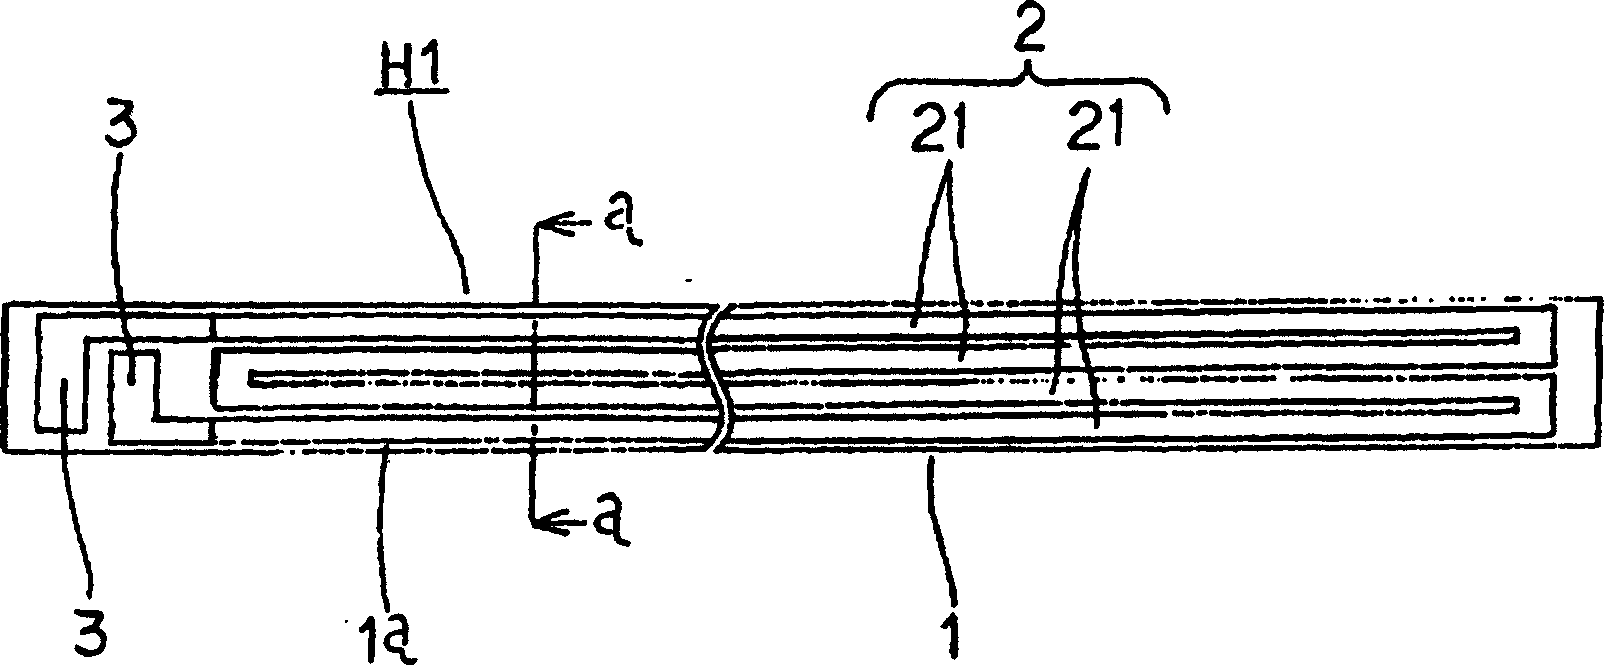 Plate heater, fixer and image forming device